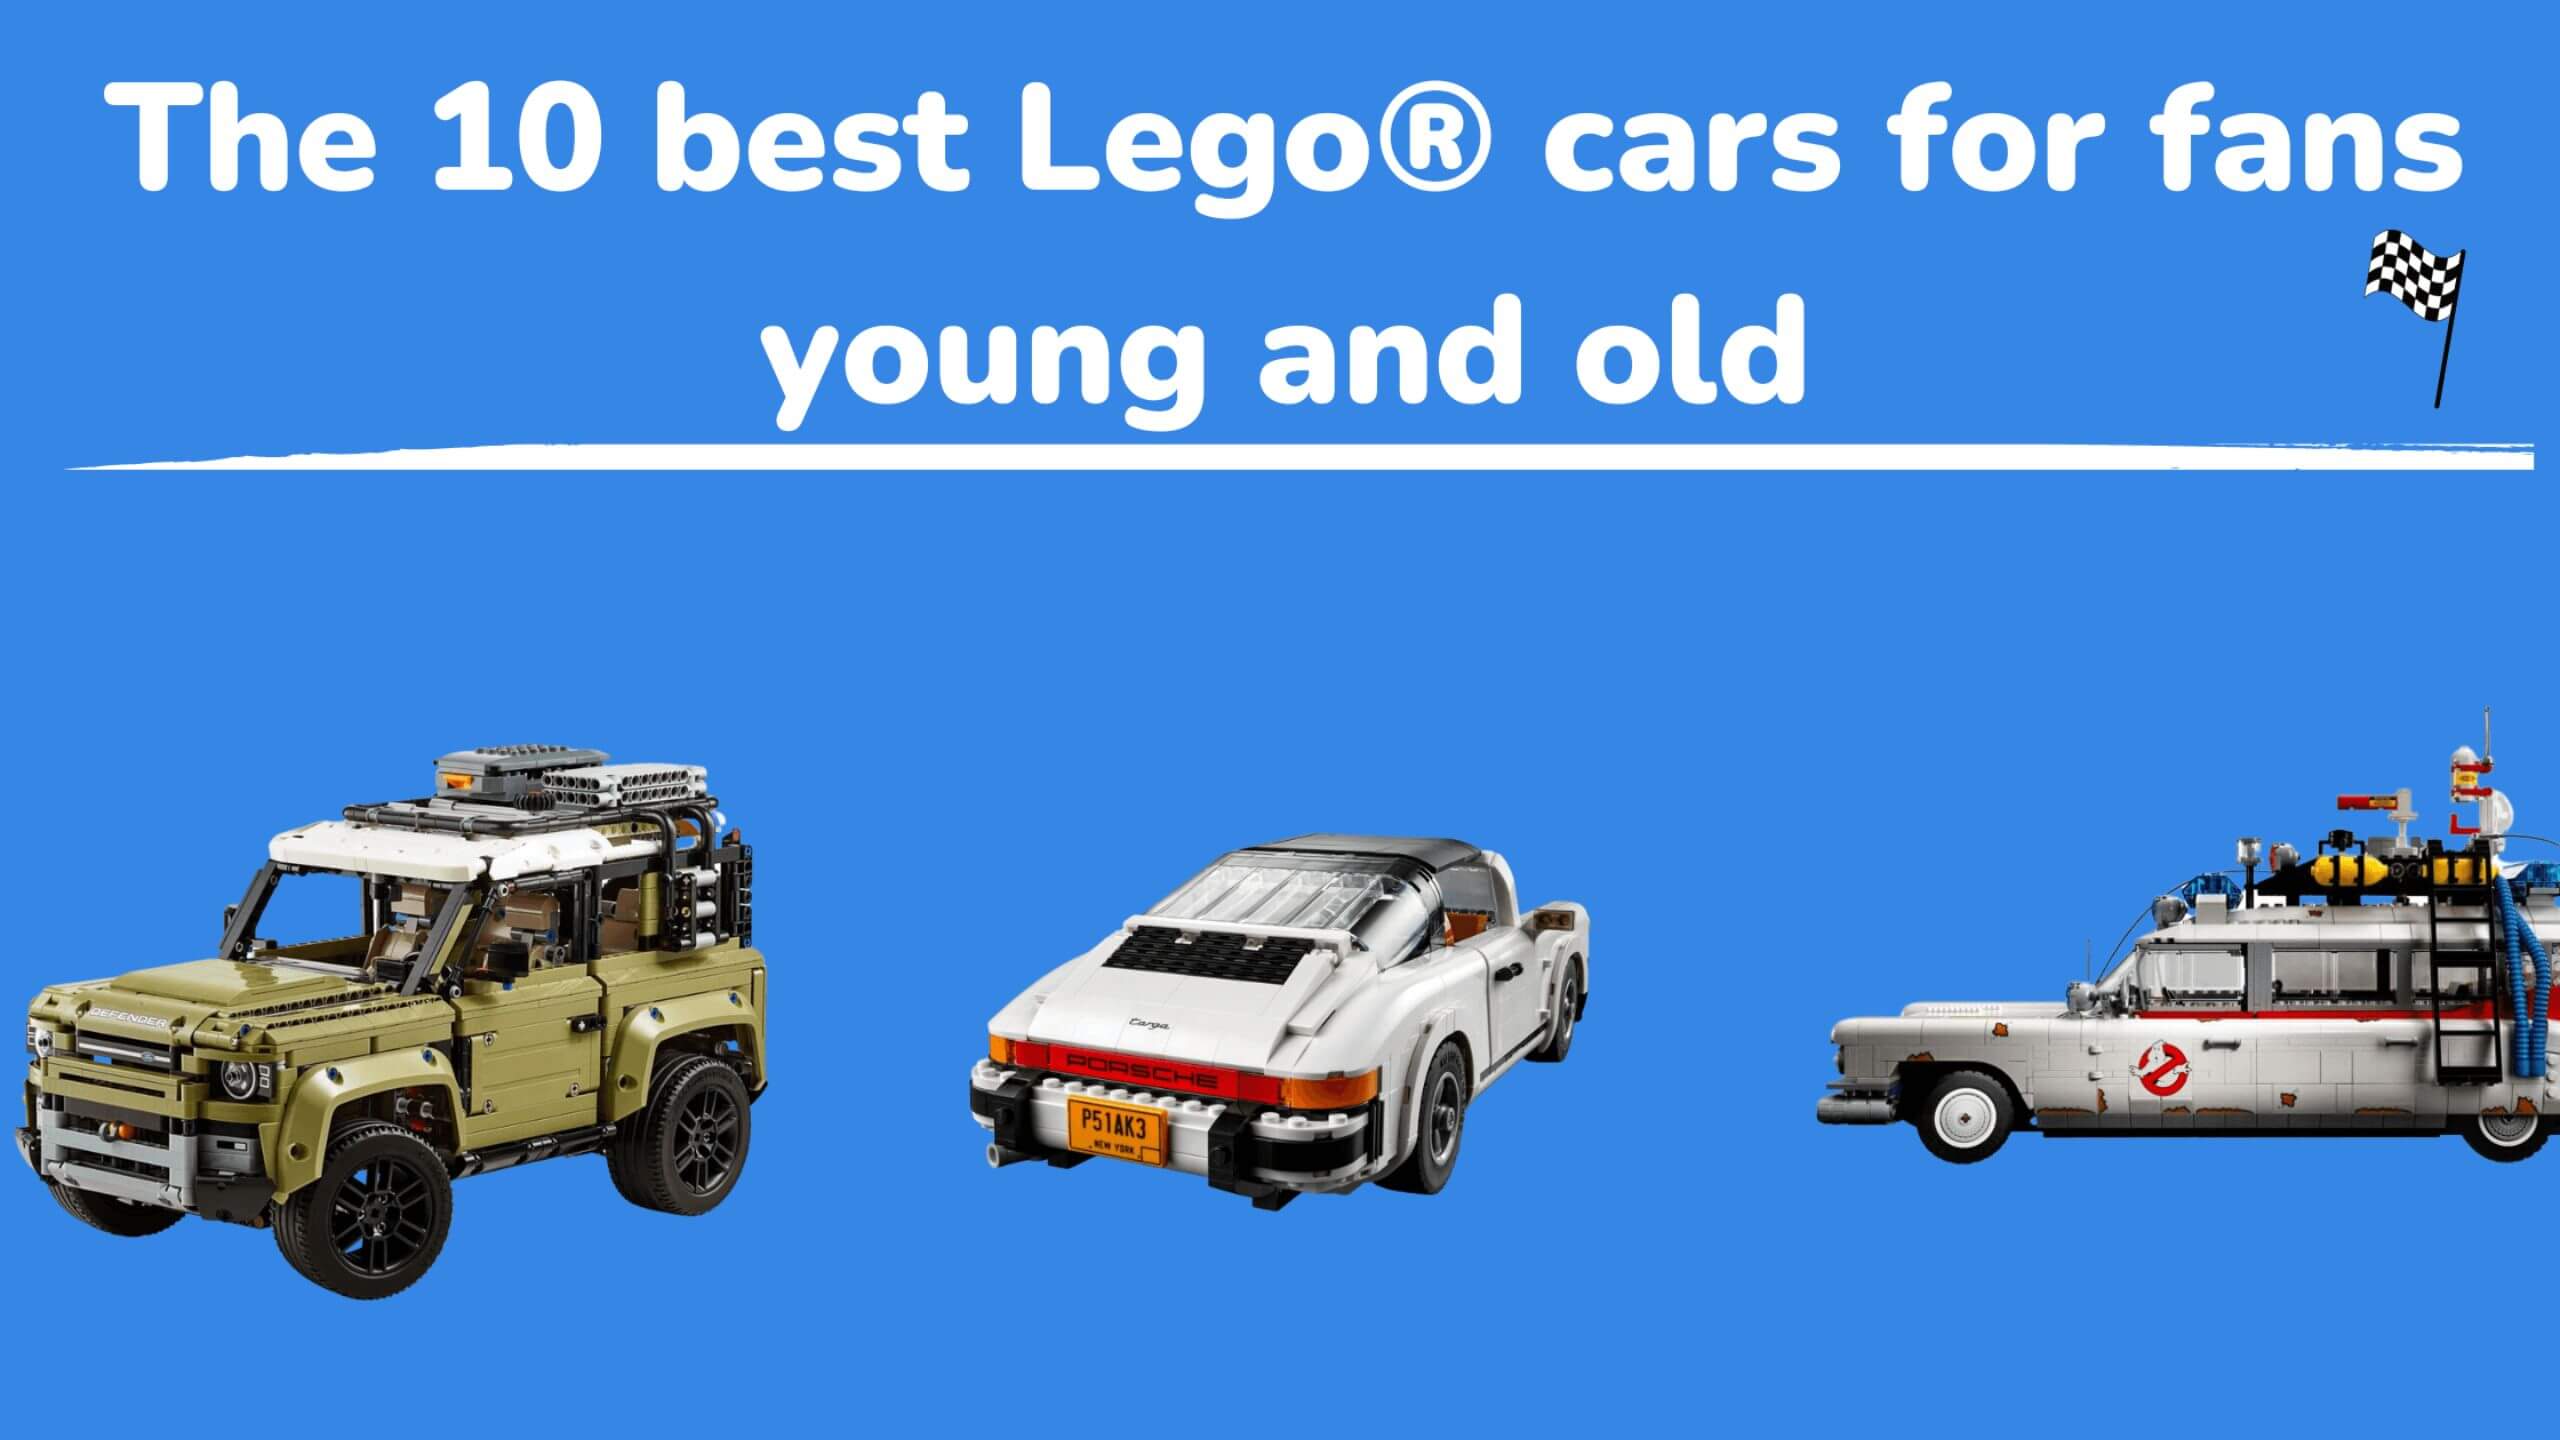 The 10 best Lego® cars for Adults